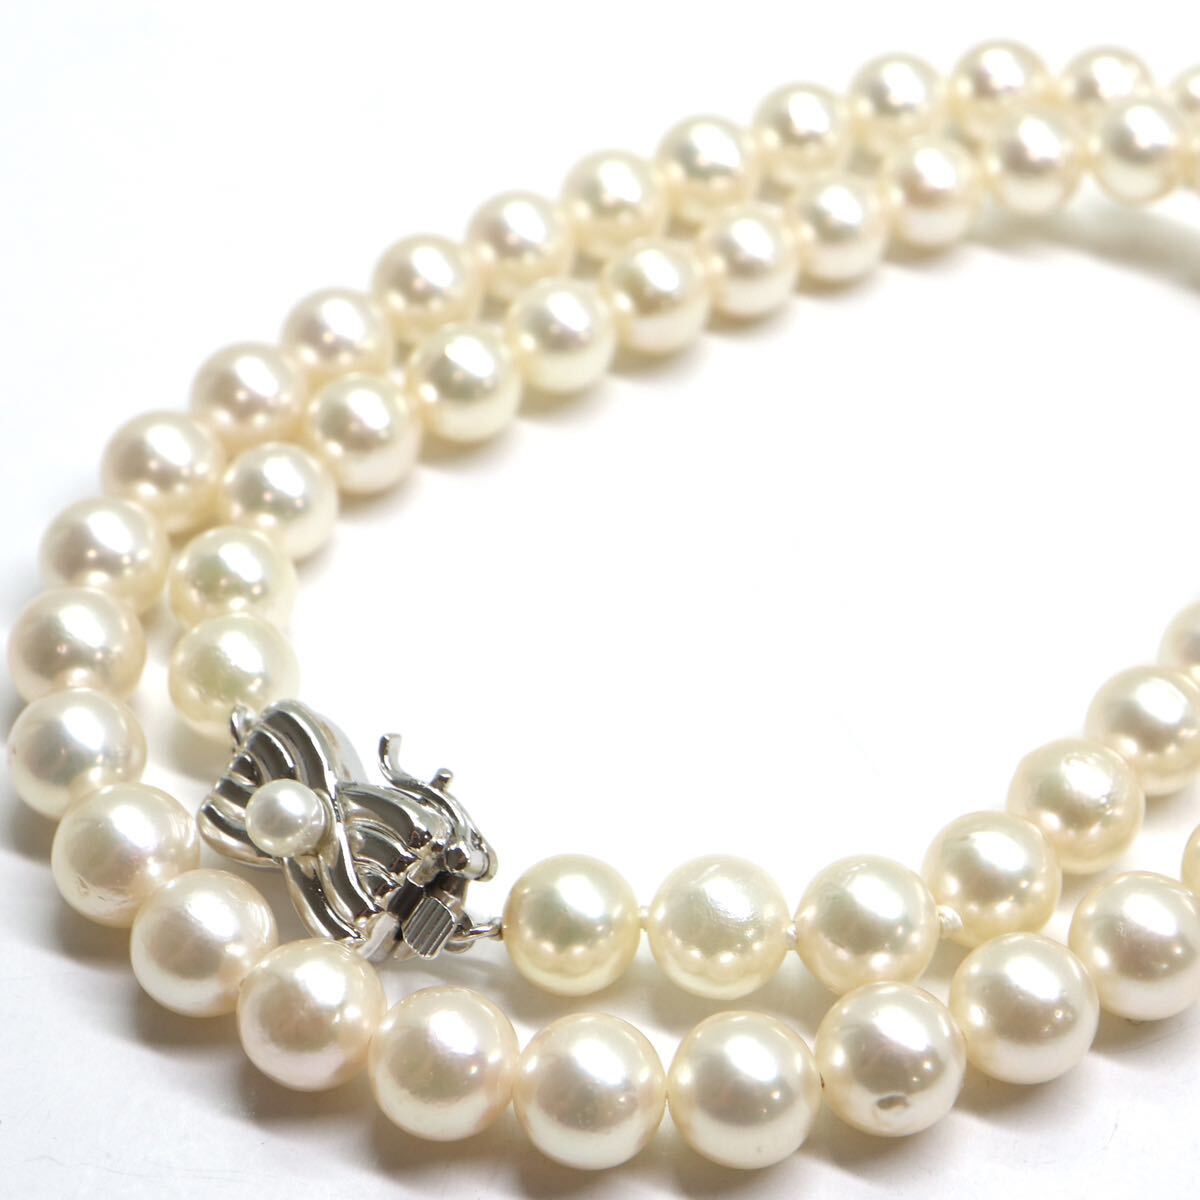 TASAKI(田崎真珠)良質!!箱付き!!《アコヤ本真珠ネックレス》A ◎約6.5-7.0mm珠 27.7g 43cm pearl necklace ジュエリー jewelry EH0/EH0_画像1